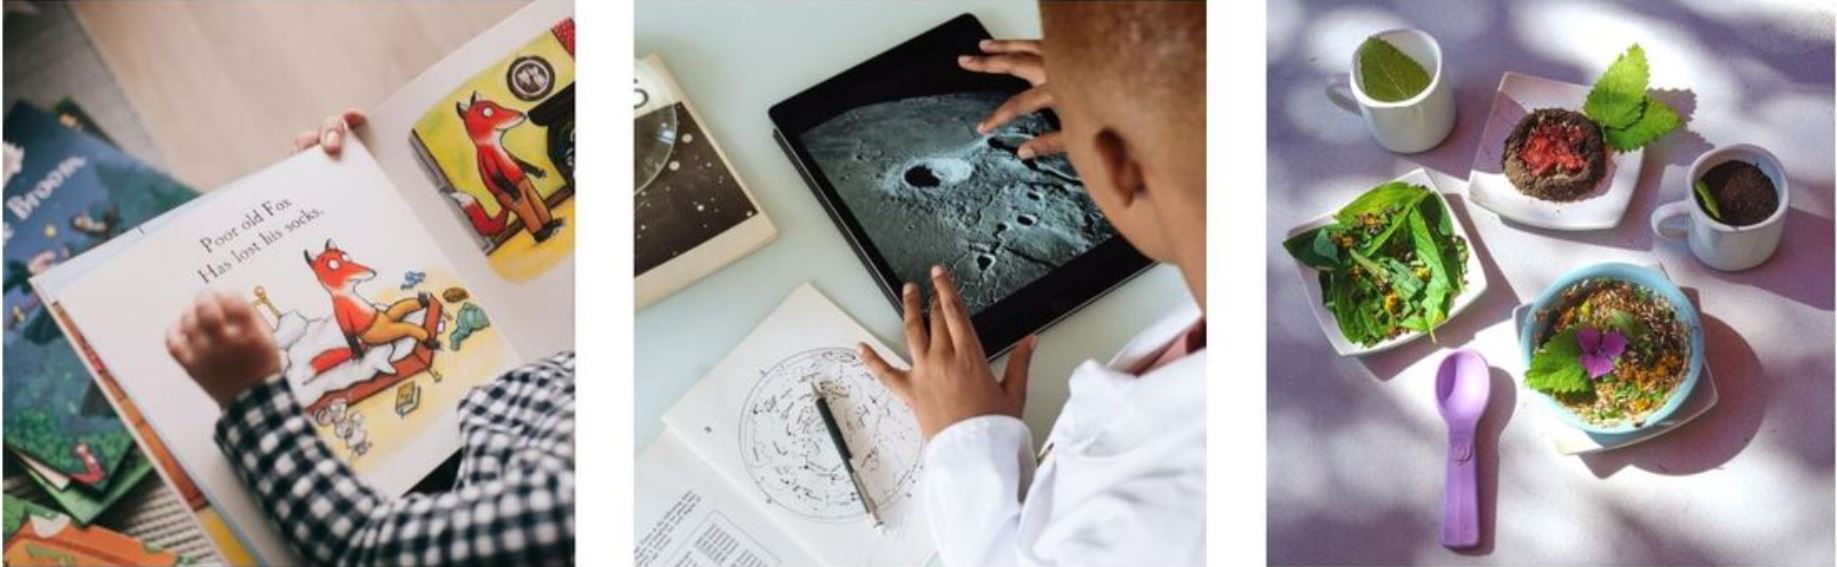 Second of 4 spreads displaying the school's Learning Centers at their center for child care, Fort Myers. First image: Child reading a book with a fox. Second image: Child on a tablet looking at the moon. Third image: An array of pretend kitchen toys.